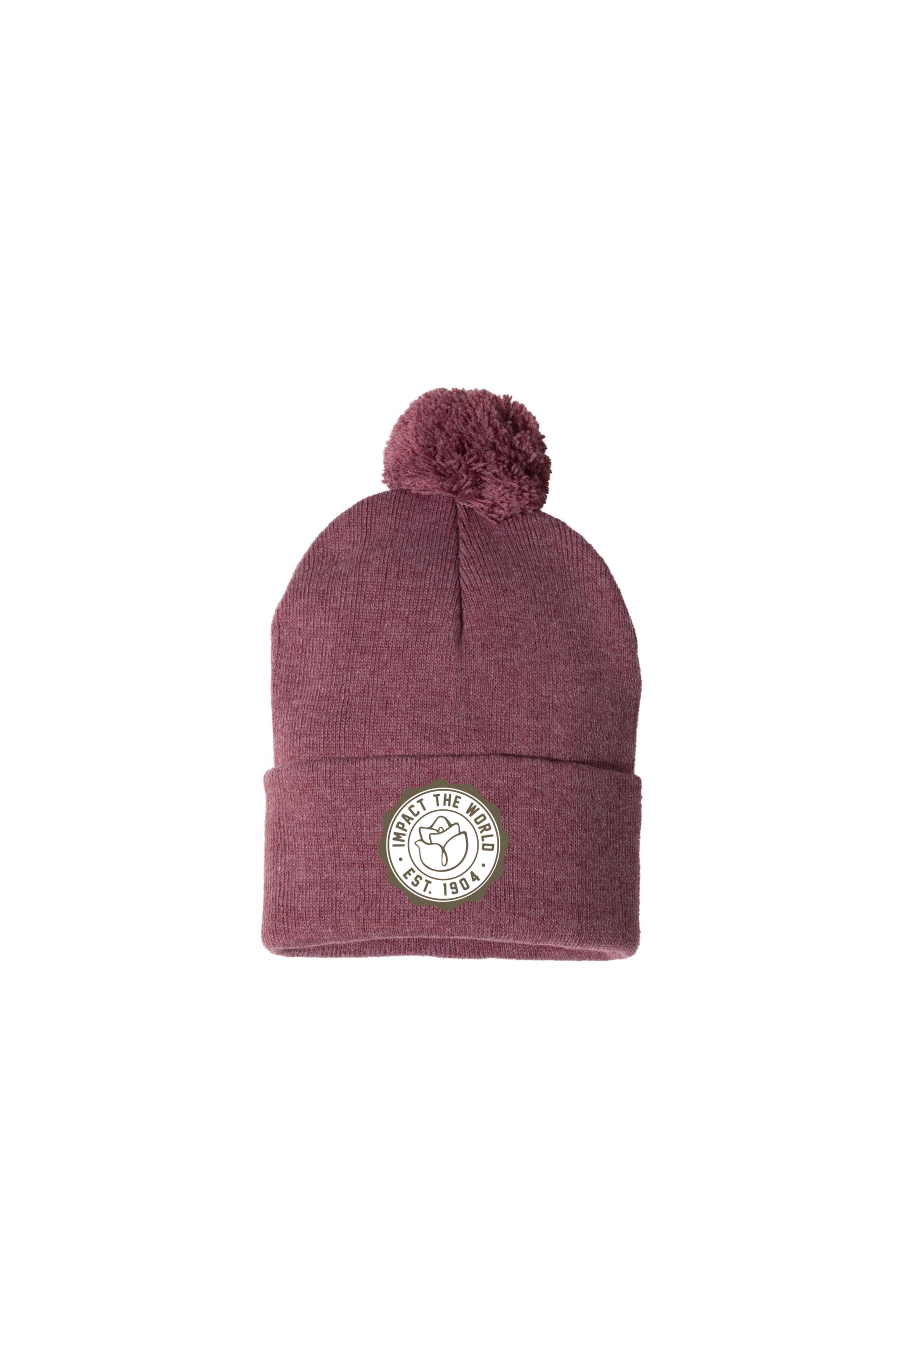 Impact the World Patch Beanie